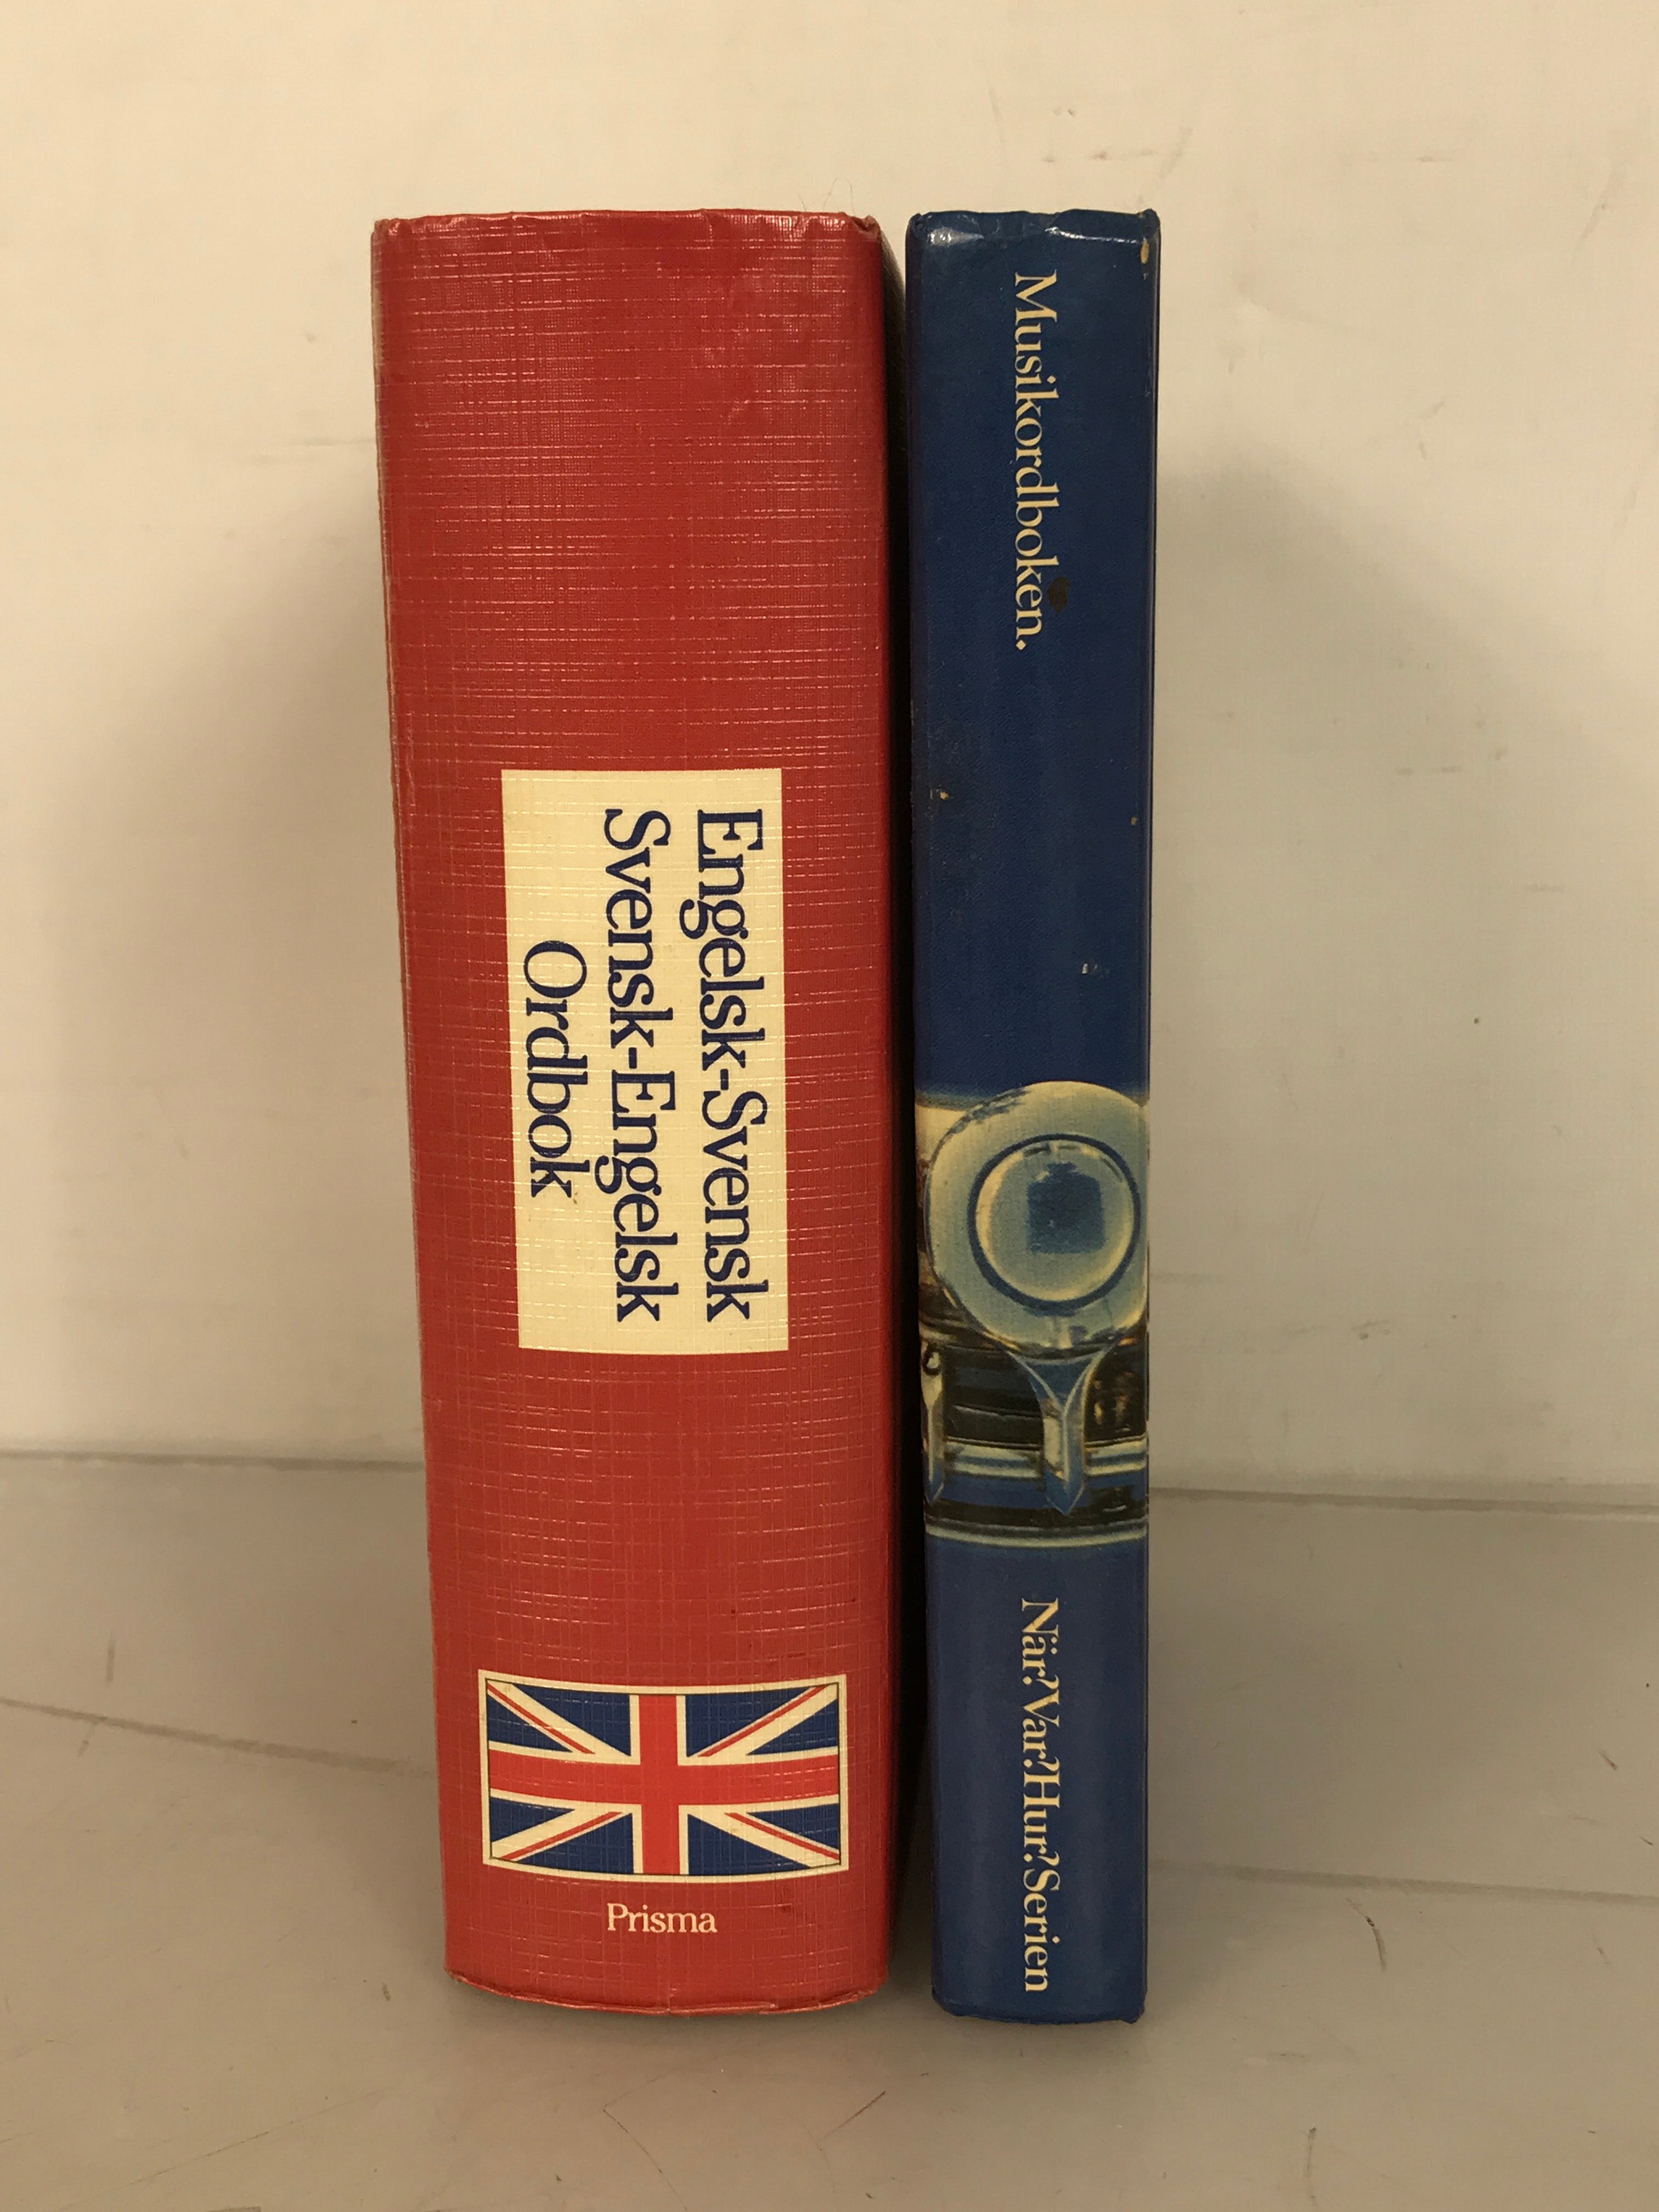 Lot of 2: A Swedish-English Dictionary 1995 / The Music Dictionary 1975 HC